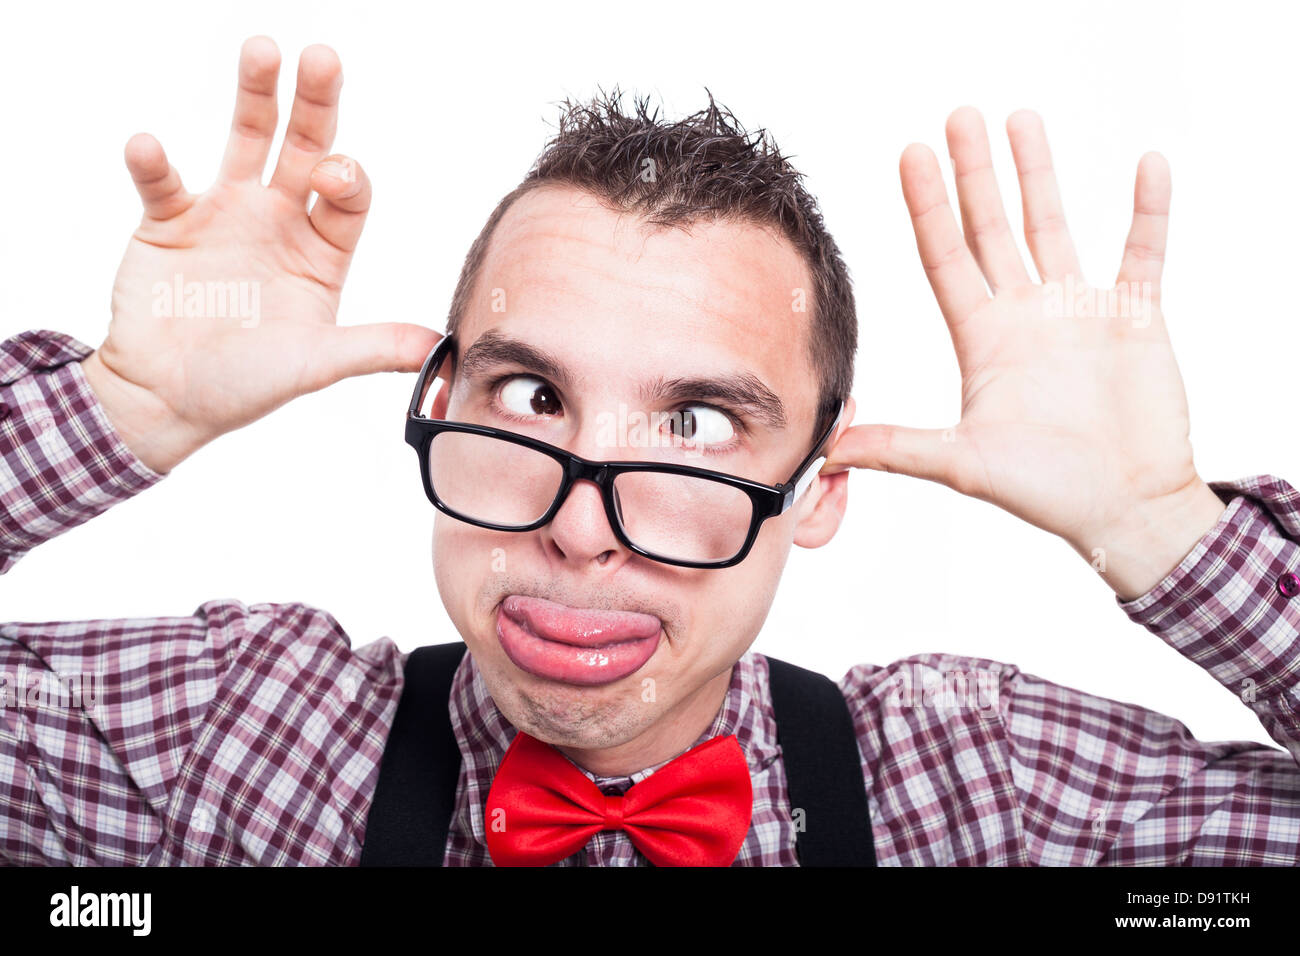 Silly cross-eyed nerd man making funny face, isolated on white background Stock Photo